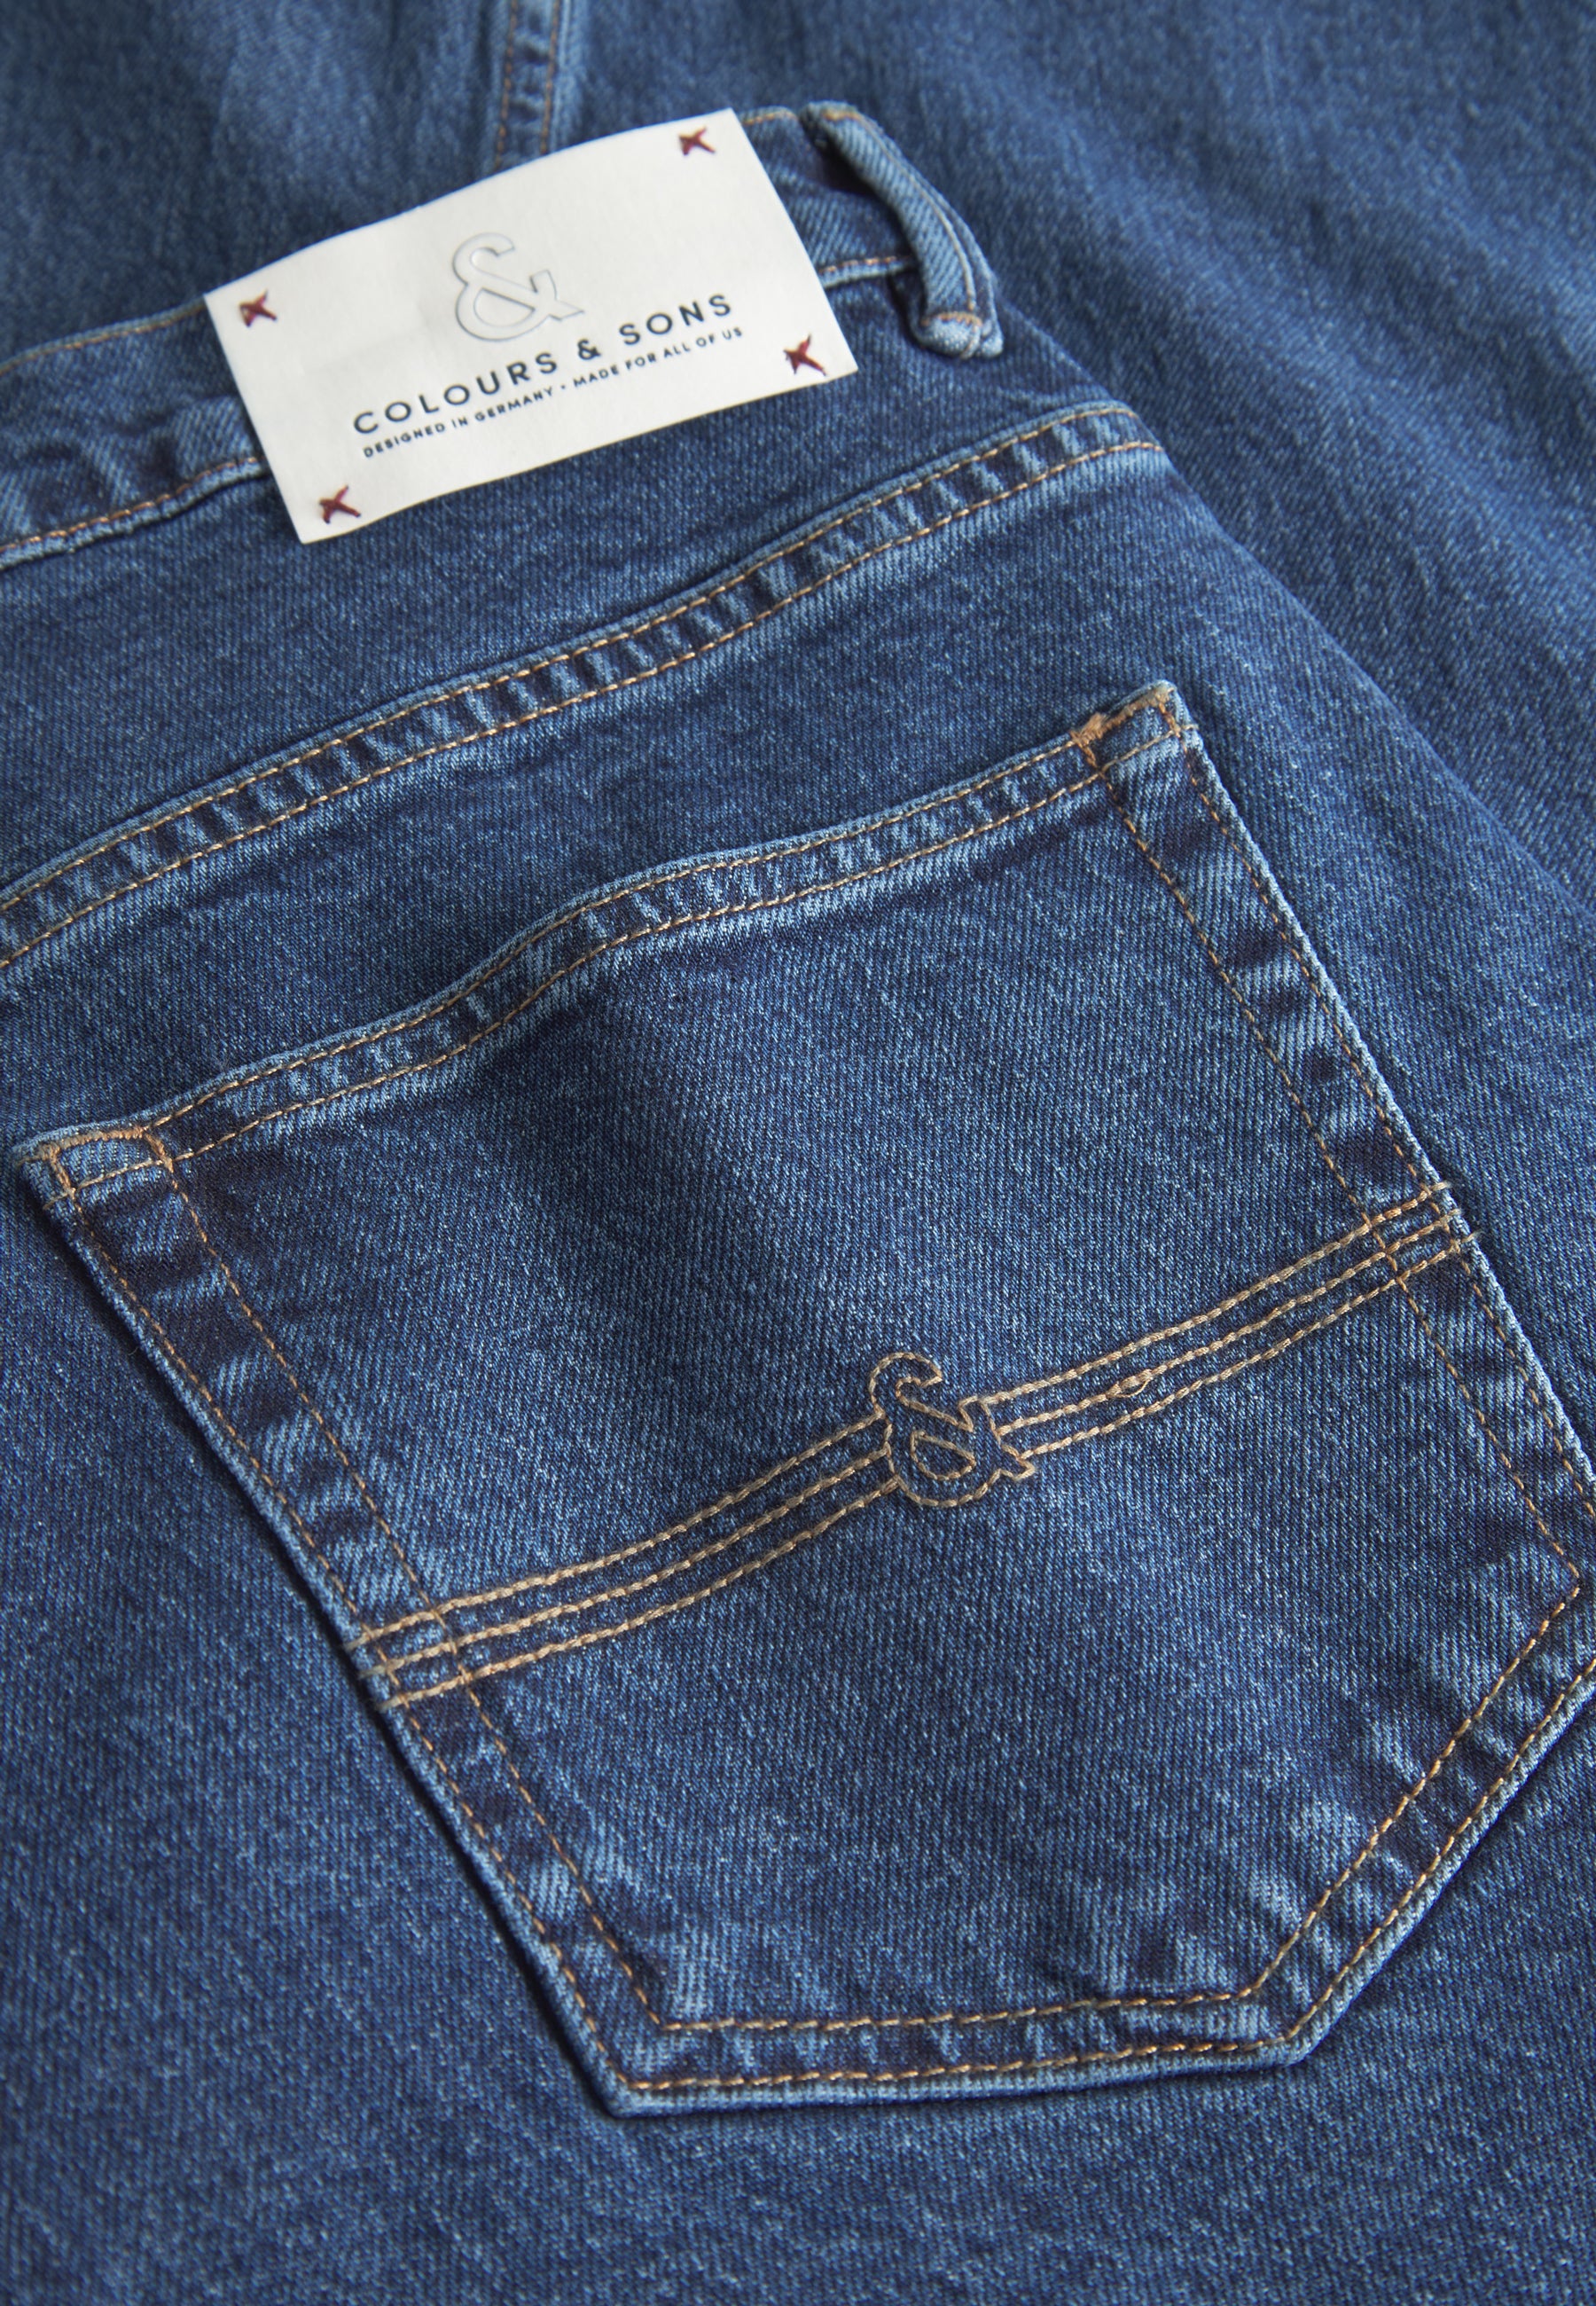 Denim Cropped in Dark Blue Jeans Colours and Sons   